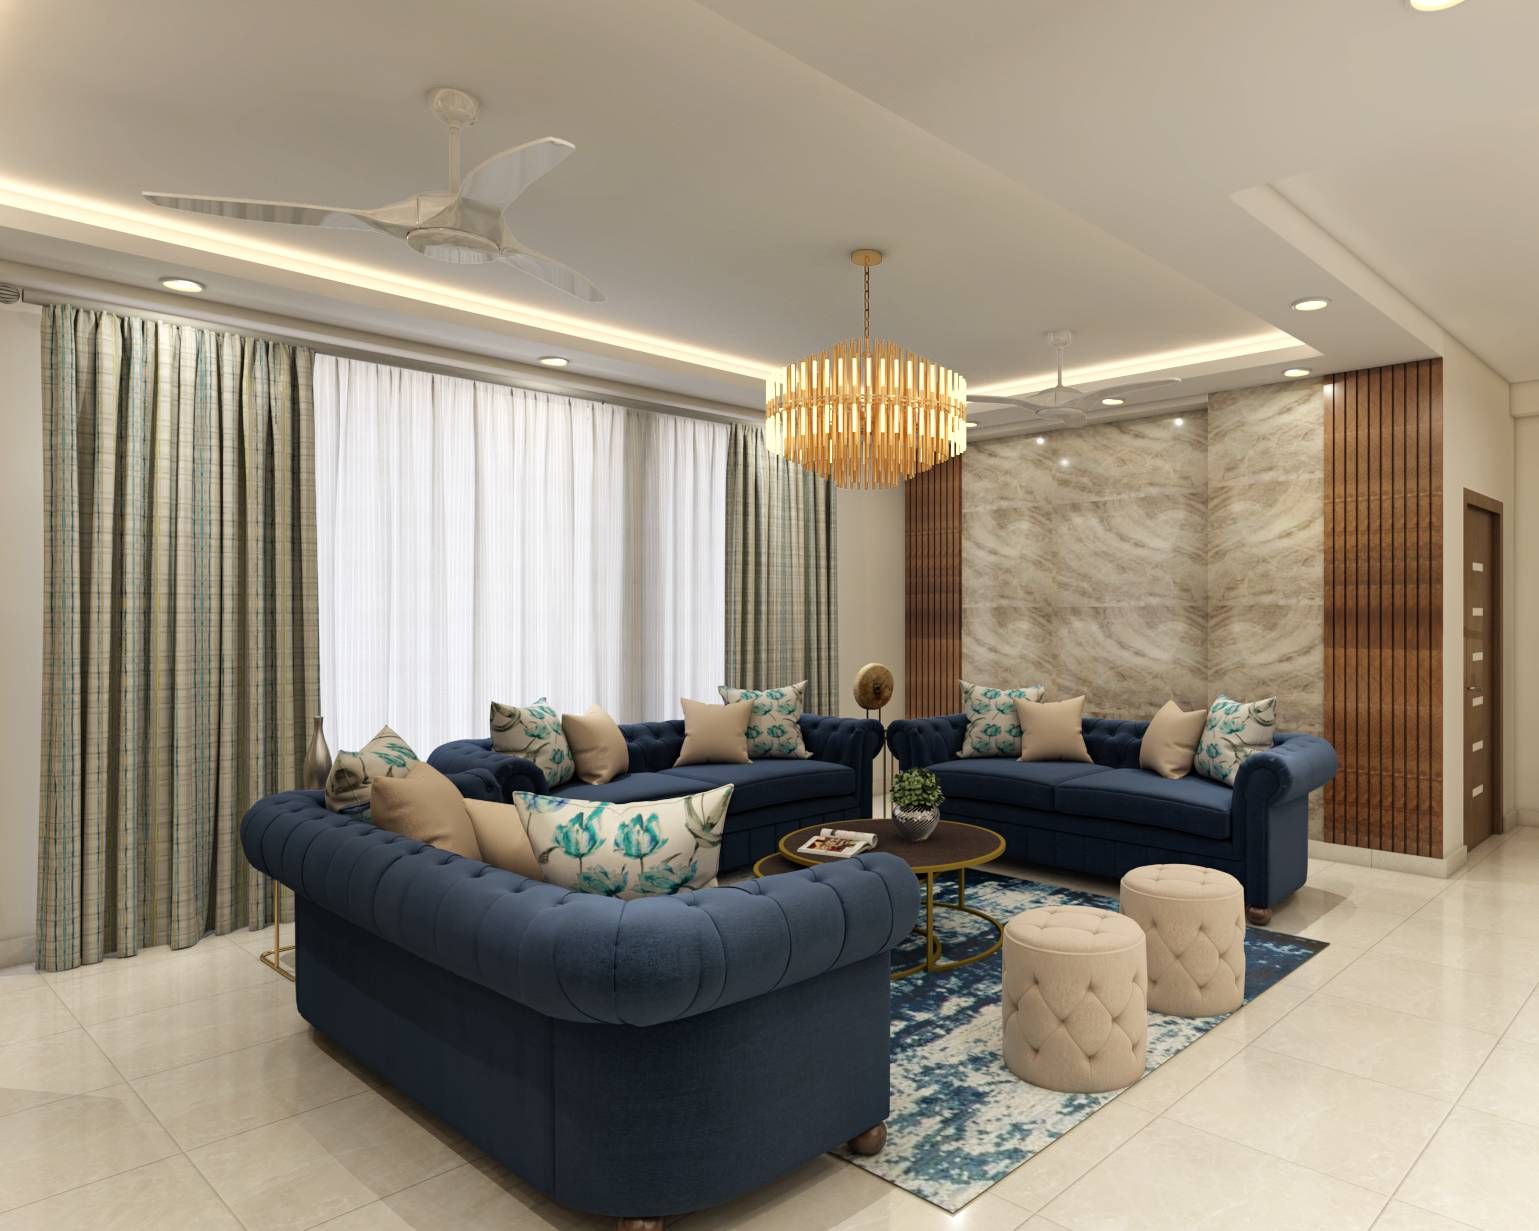 Contemporary Living Room Design With 3 Royal Blue Upholstered Sofas